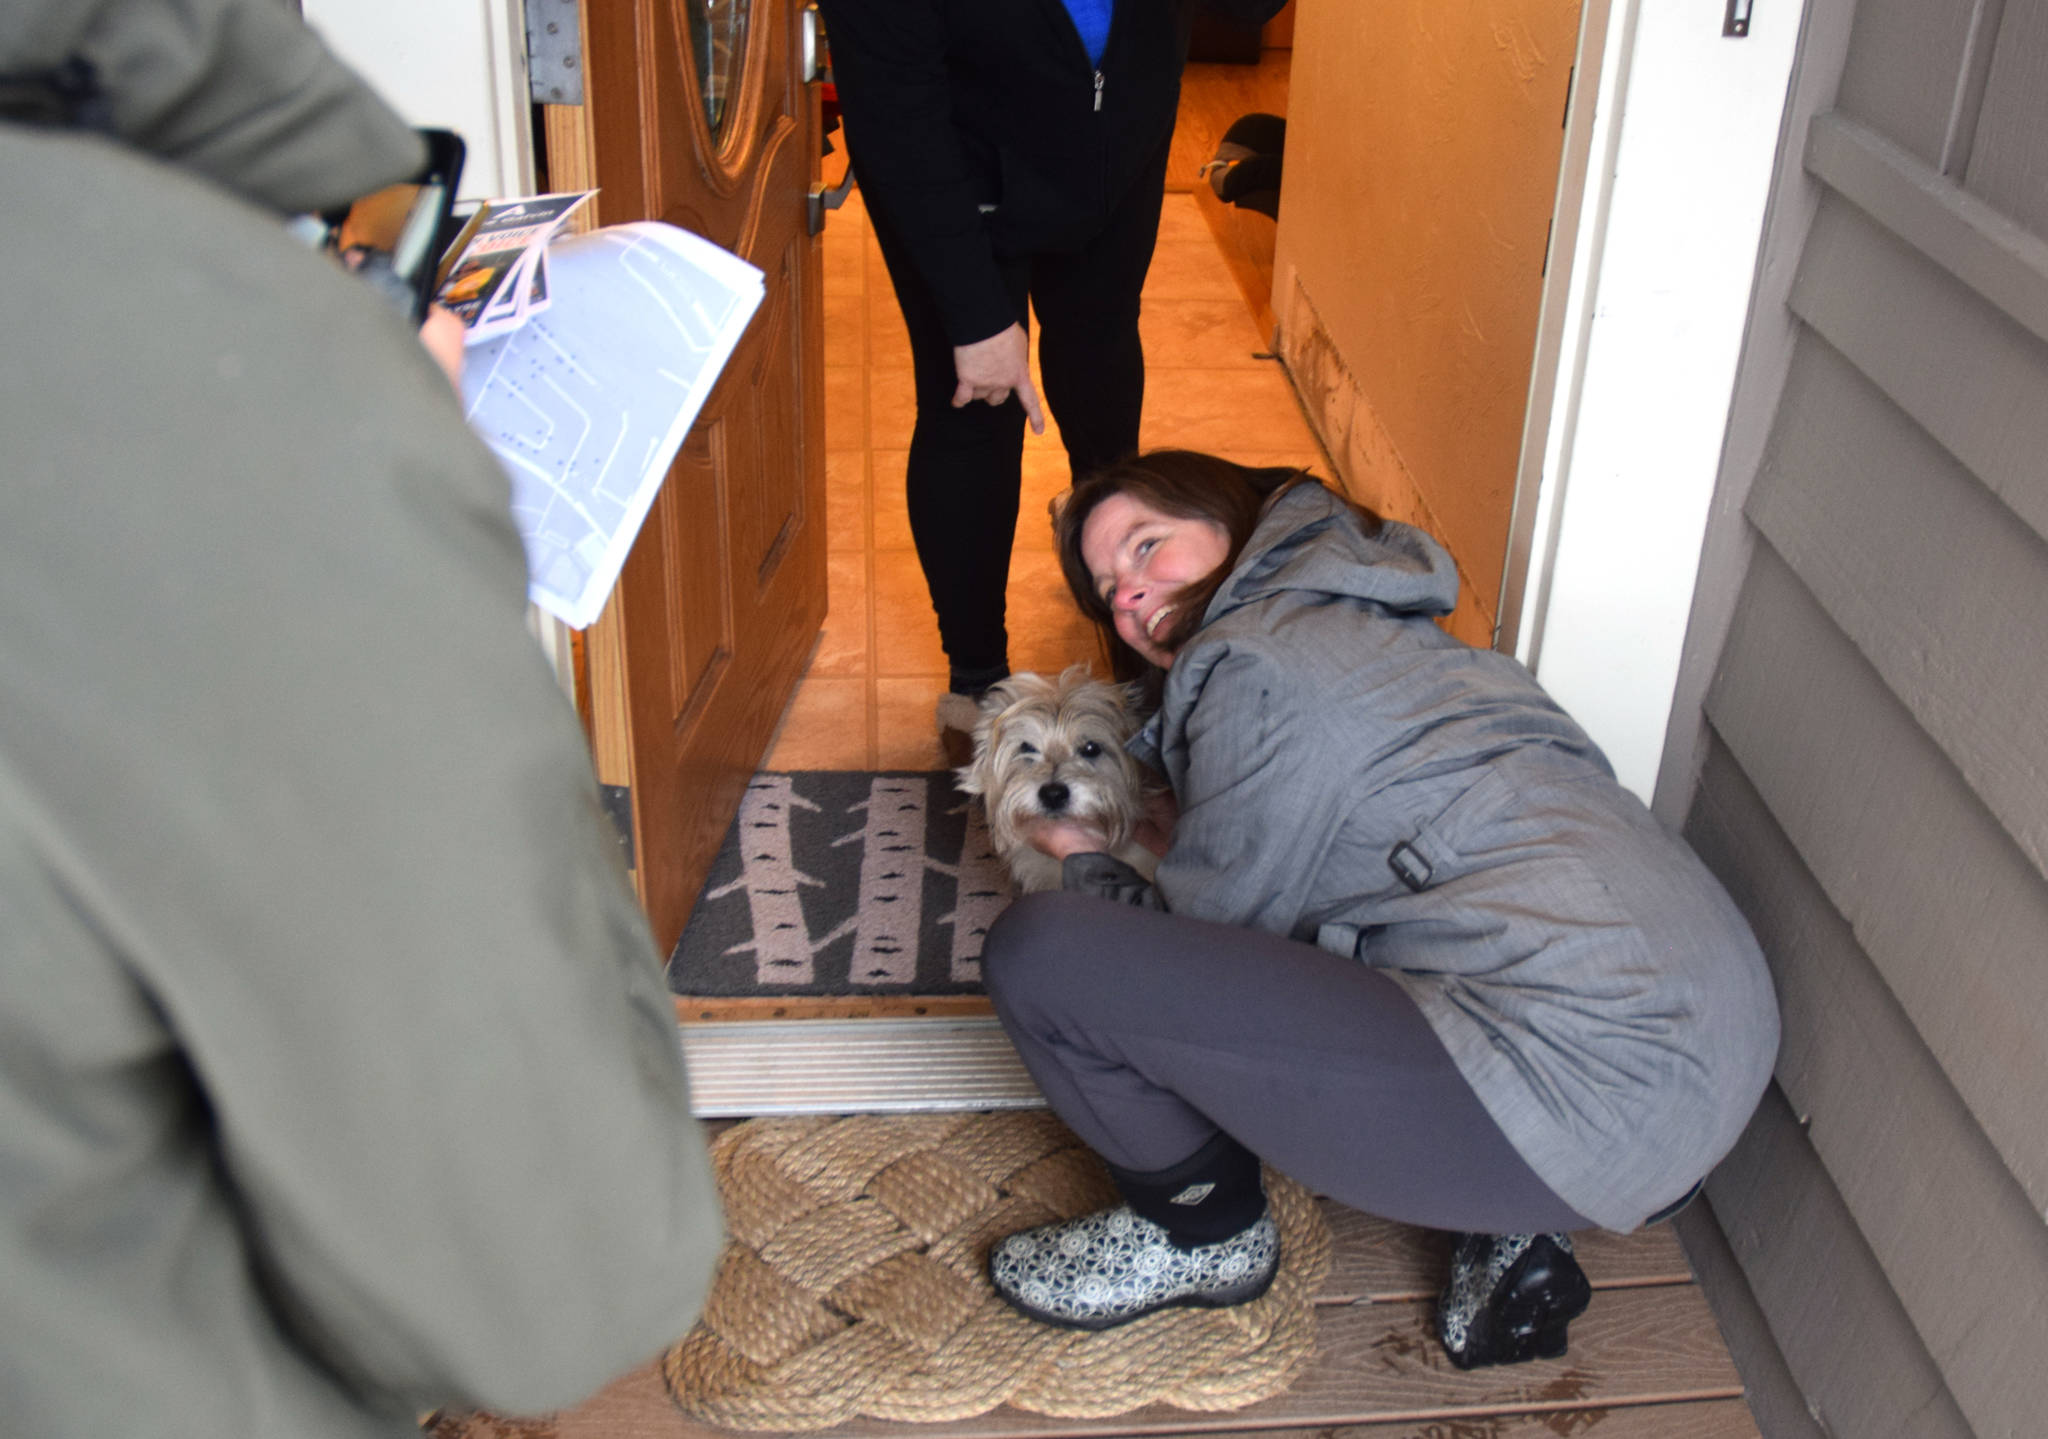 Alyse Galvin, Alaska’s independent candidate for U.S. House of Representatives, hugs a dog while going door to door for support Sunday, Nov. 4, 2018 in the Mendenhall Valley. Galvin was in Juneau for a final campaign stop ahead of the election. (James Brooks | Juneau Empire)